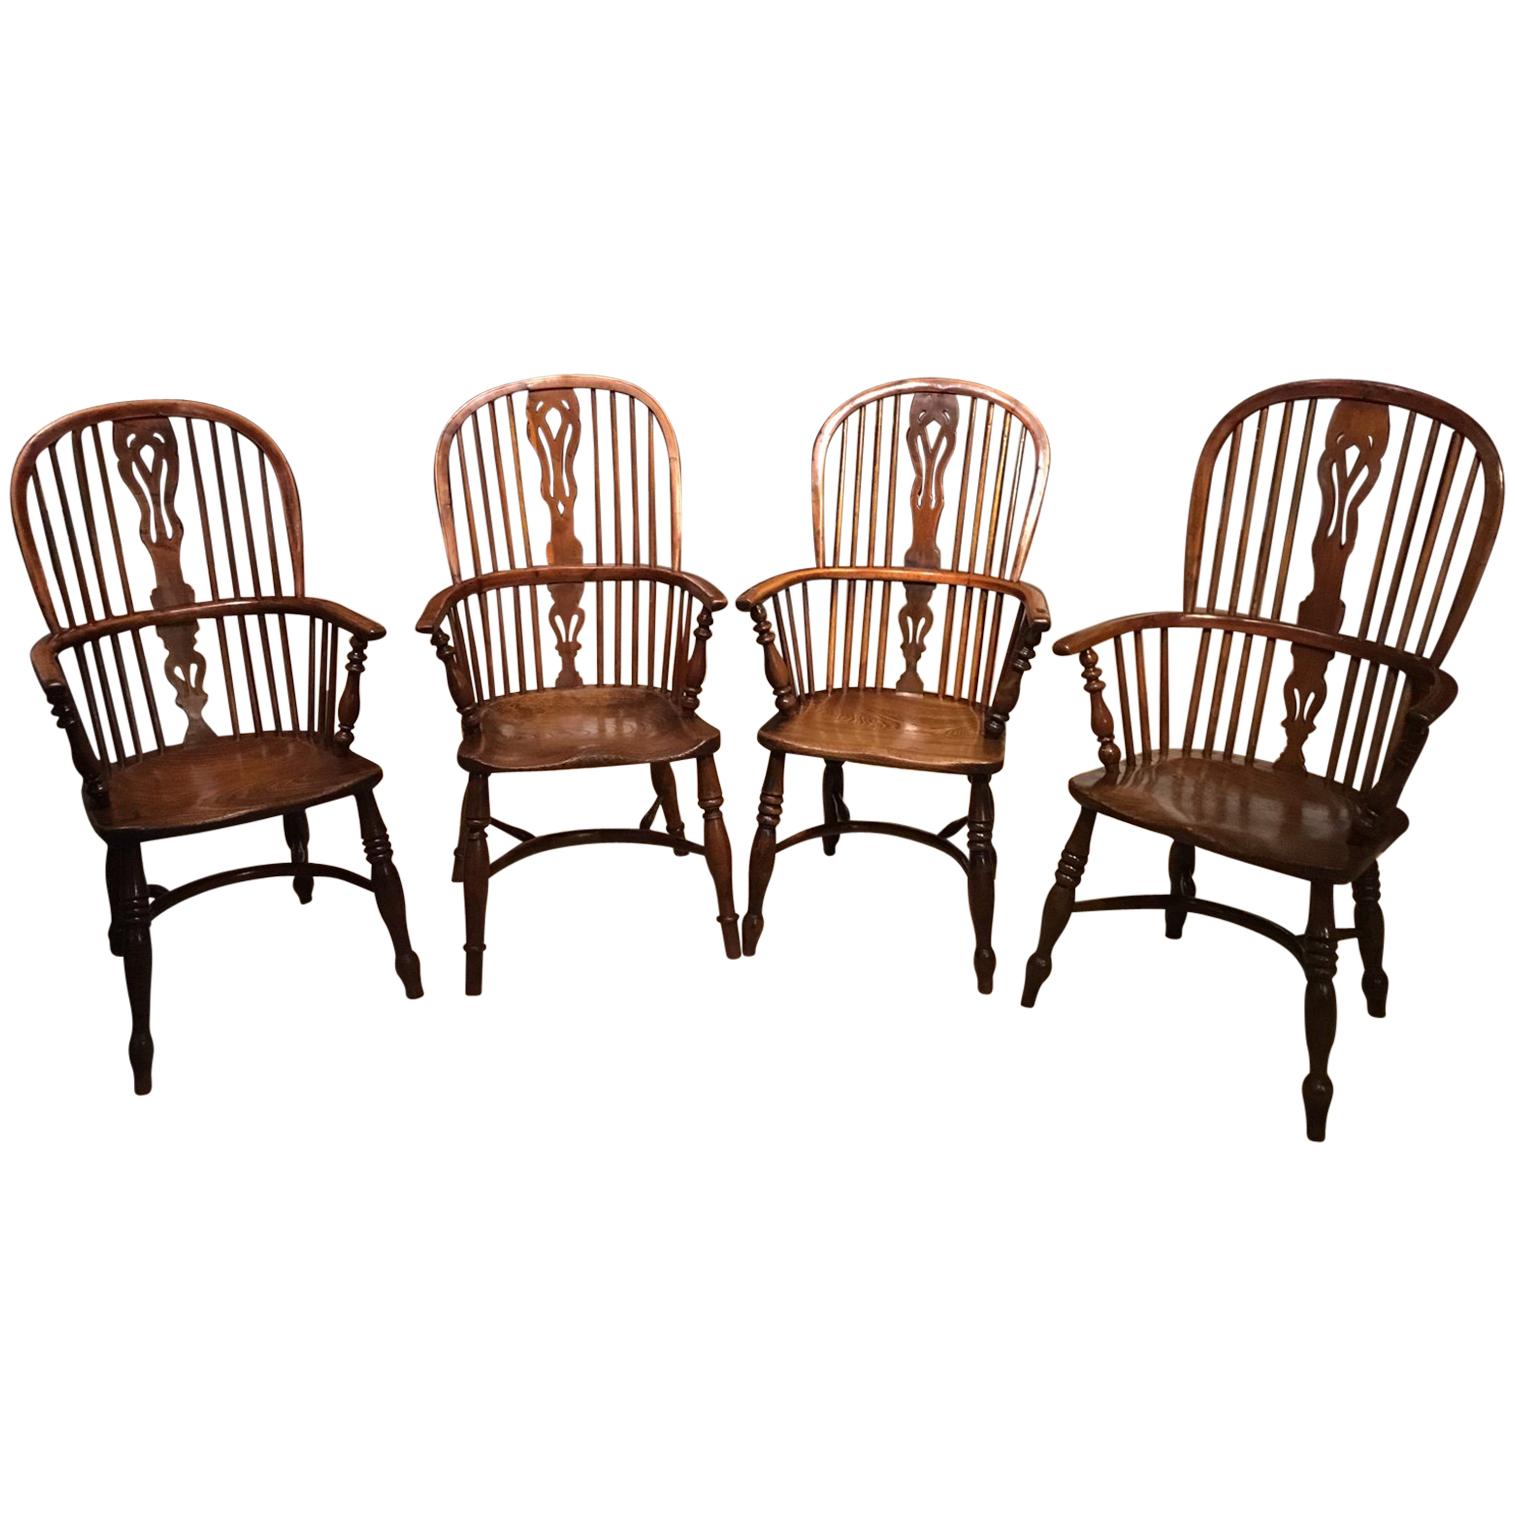 Harlequin Set of Four Yew Wood High Back Windsor Armchairs